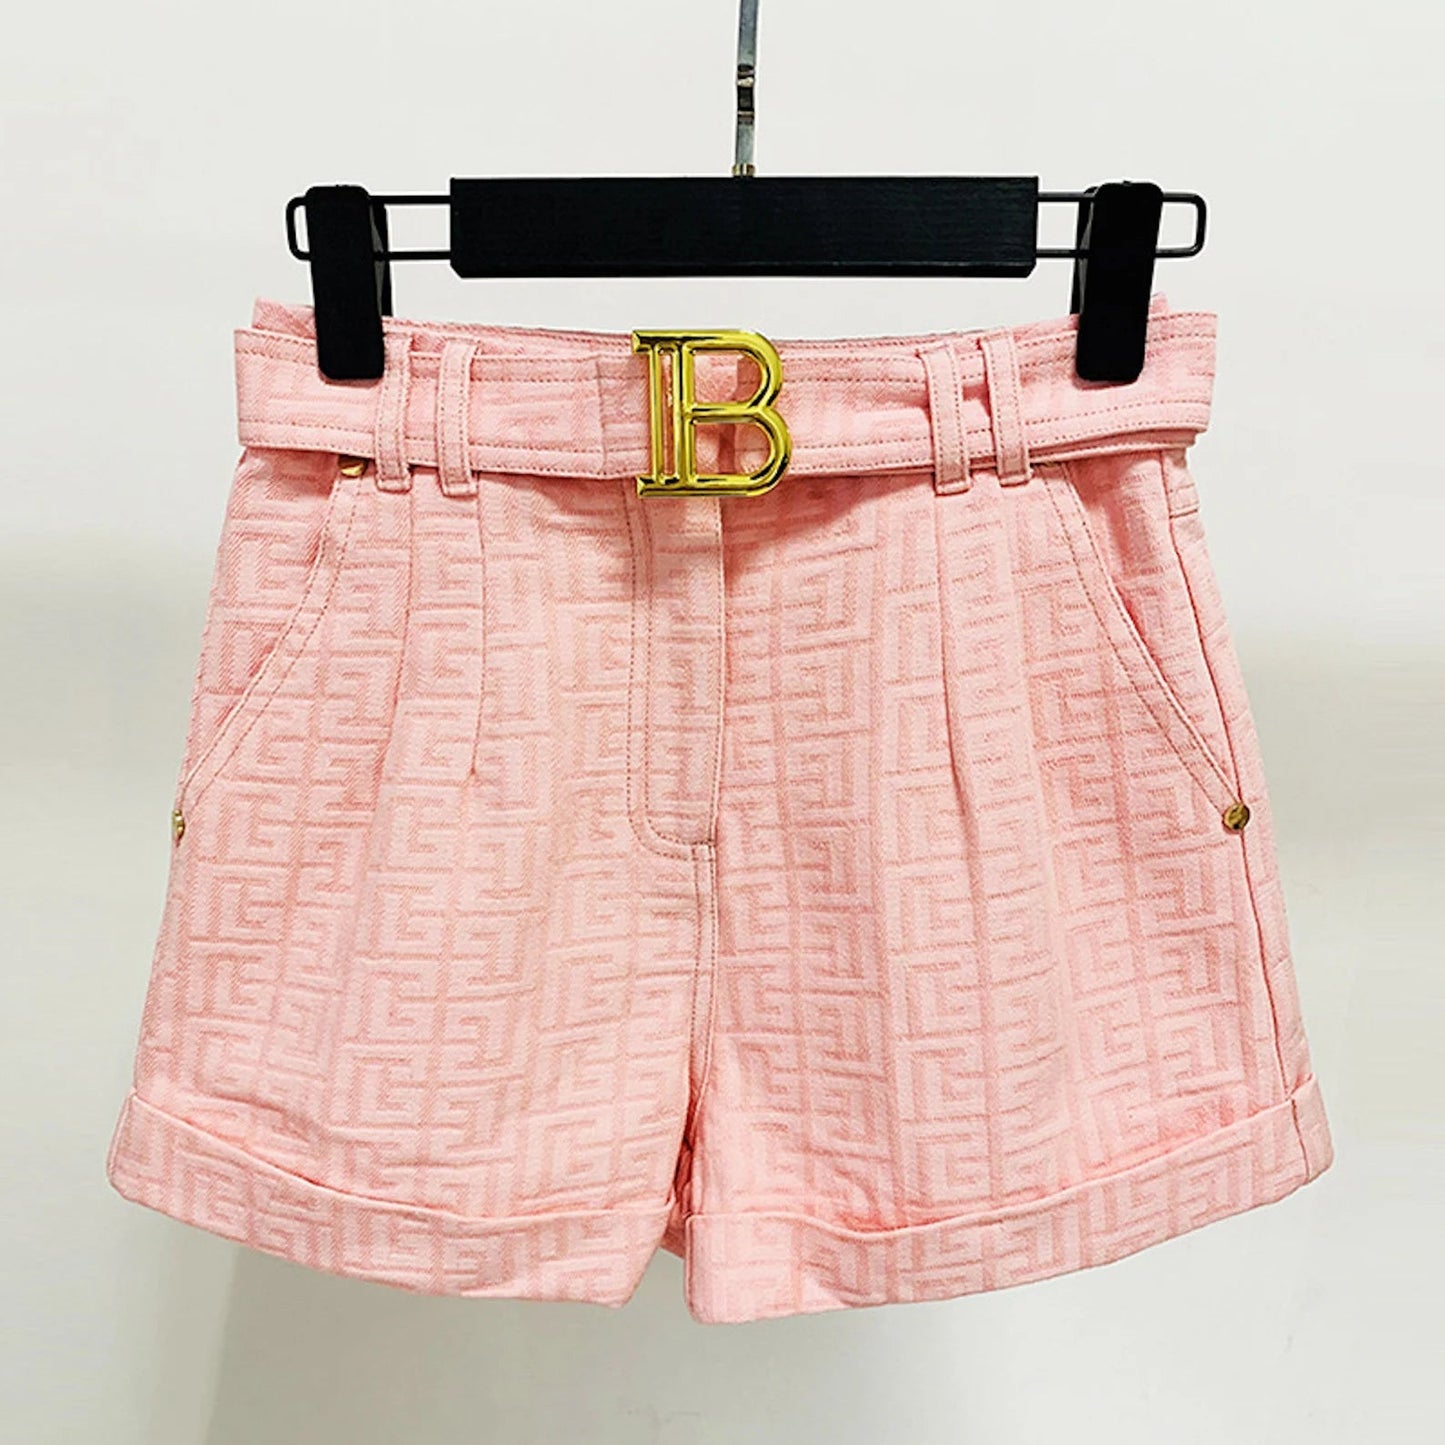 White Black Khaki Pink Colors 2022 Luxury Women's High Waist Belted Maze Pattern Shorts This High Waist Shorts is available in 4 different colours. For Holidays, Shopping, Parties, and other occasions, a basic T-shirt will complete your daily summer style. This shorts are elegant and comfy thanks to the maze pattern and belt. The high waistline slims you down and accentuates your curves.